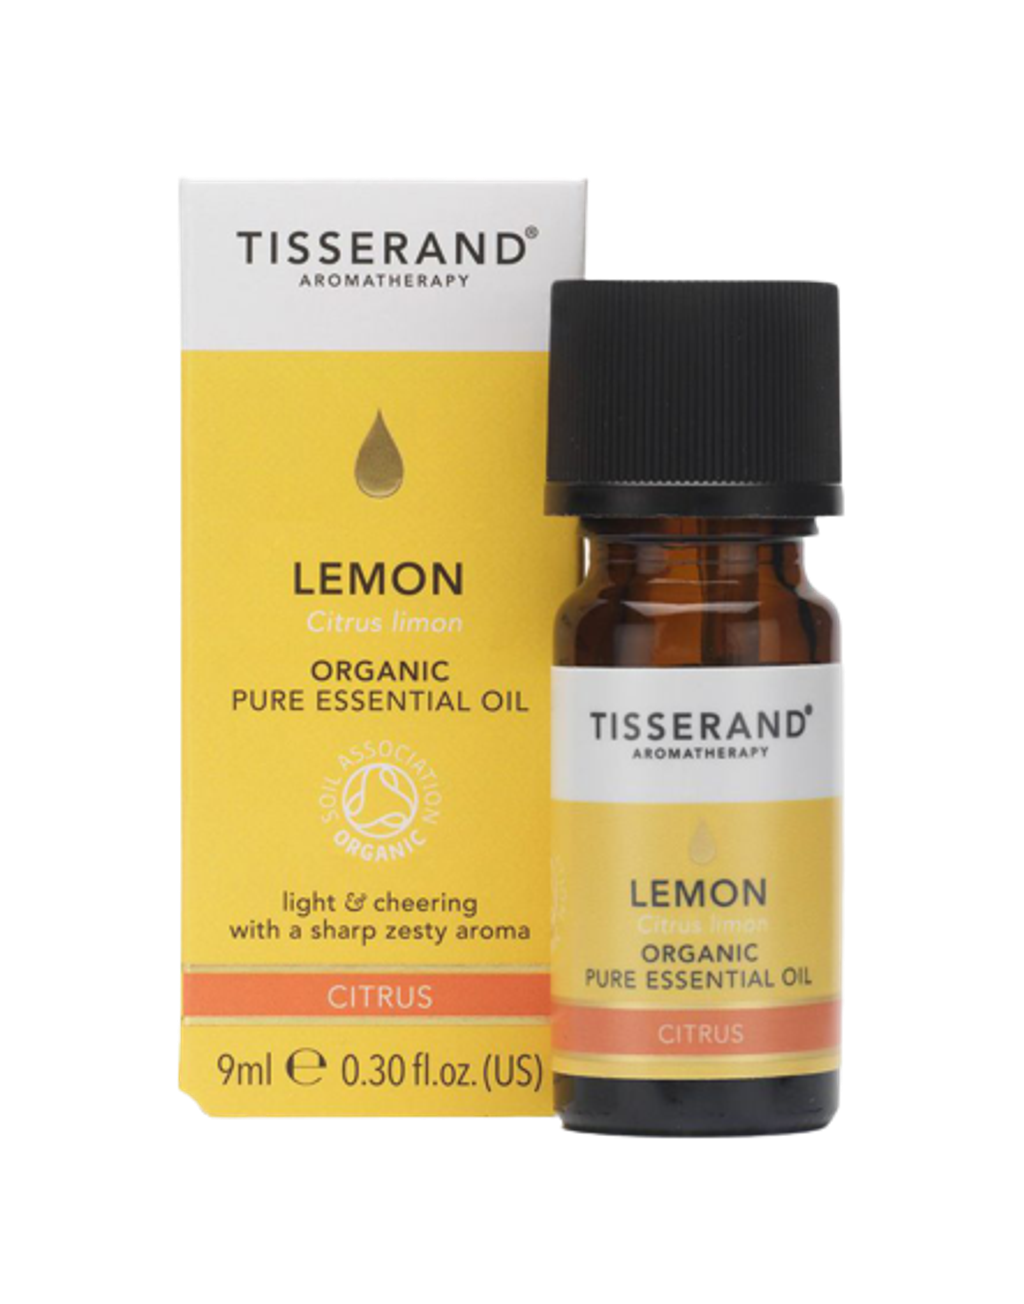 tisserand-aromatherapy-lemon-essential-oil_2_1-removebg-preview.png